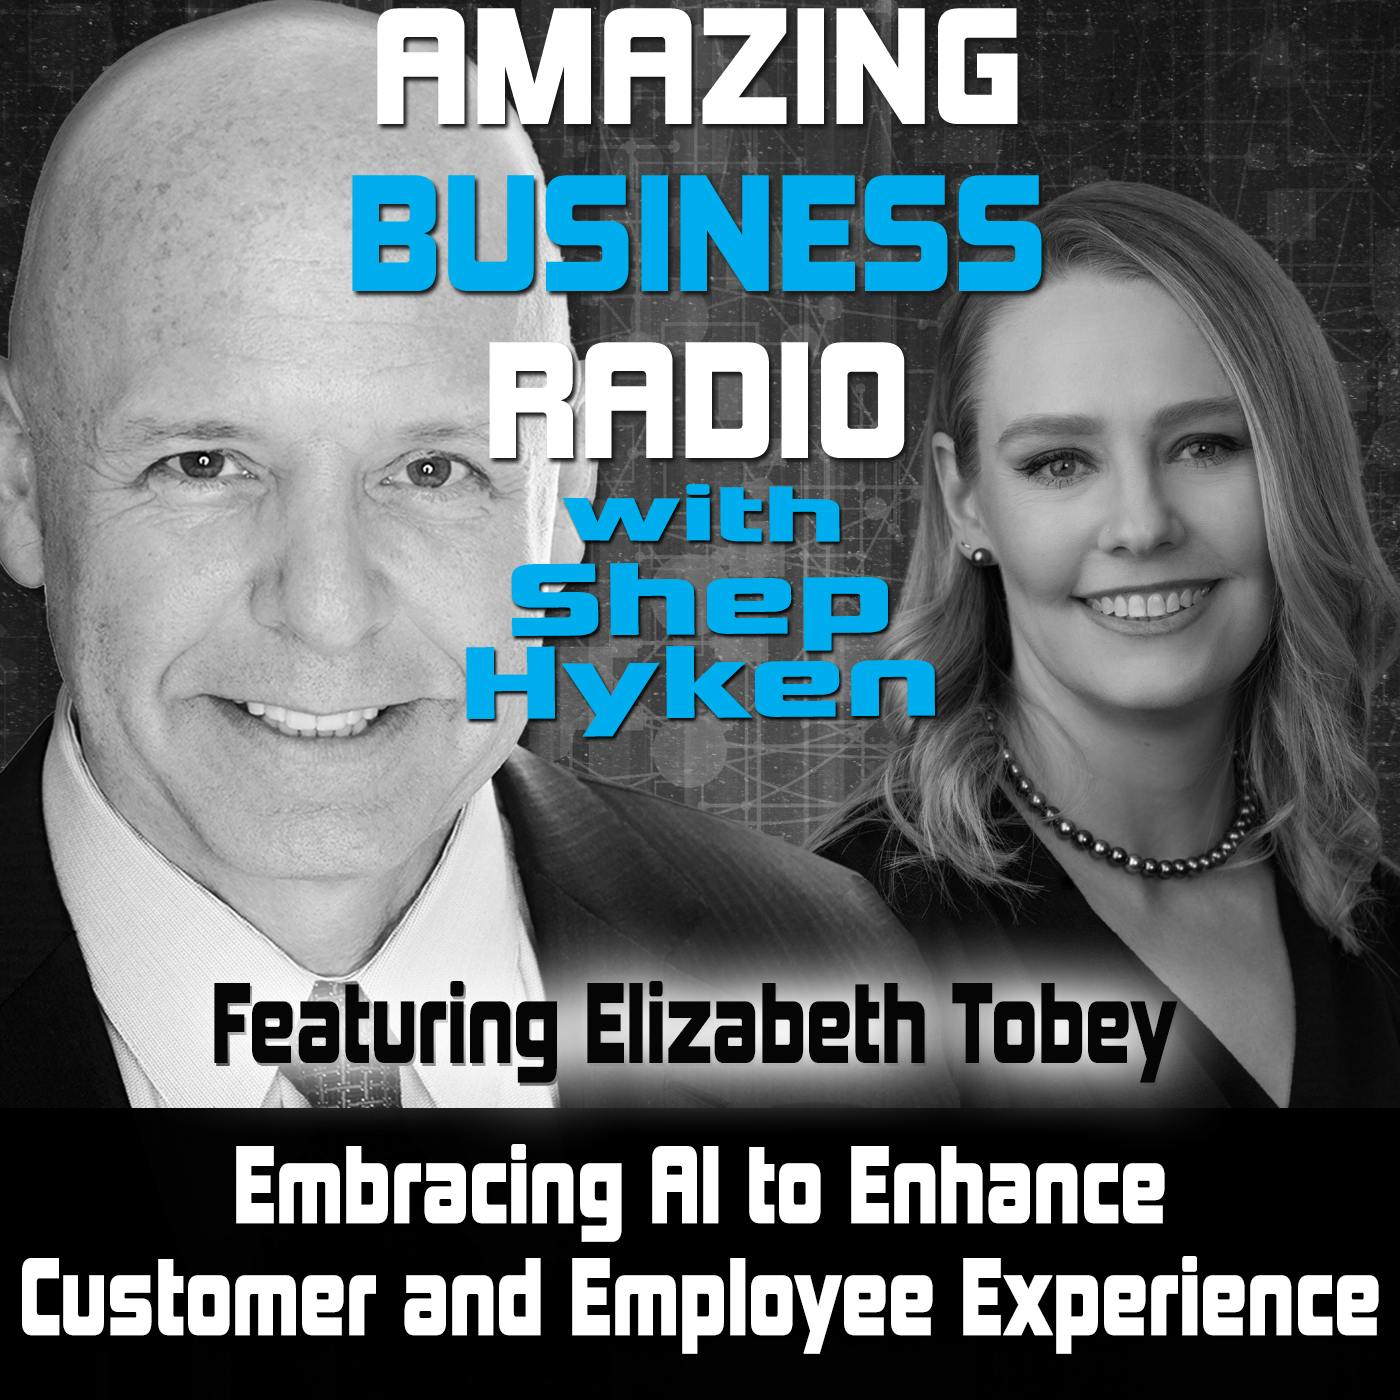 Embracing AI to Enhance Customer and Employee Experience Featuring Elizabeth Tobey